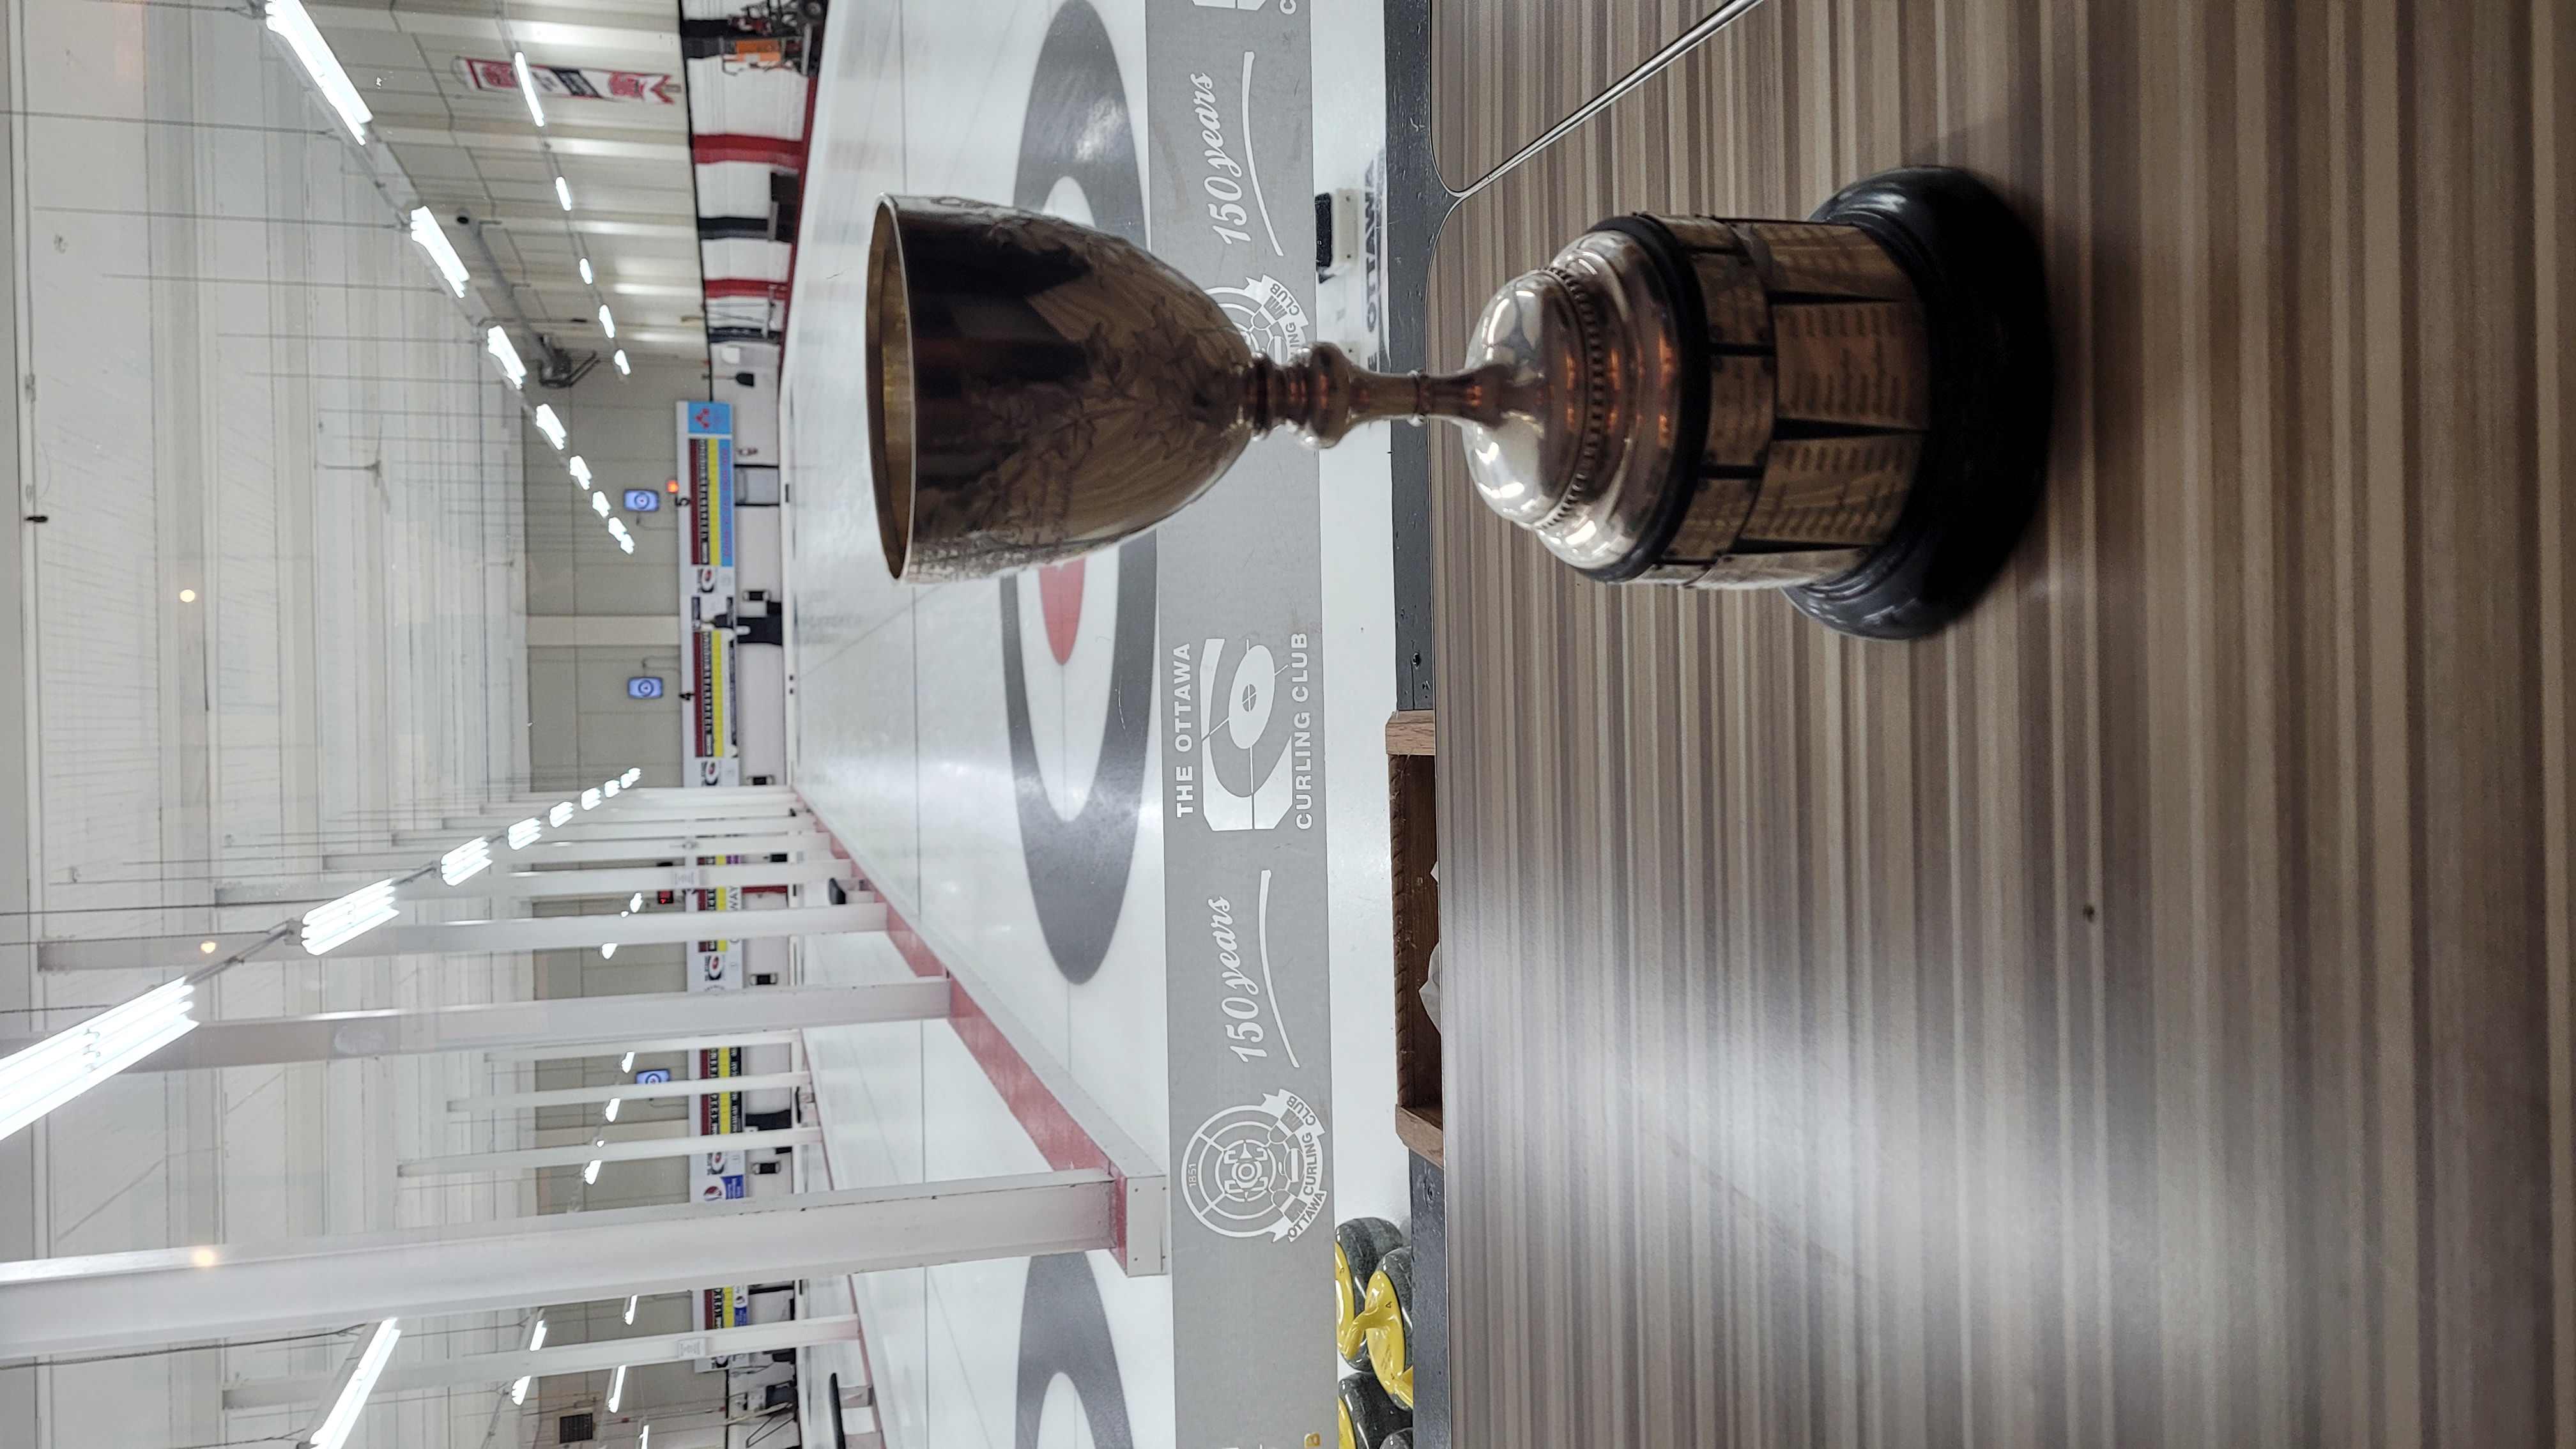 currier cup with empty curling rink in background